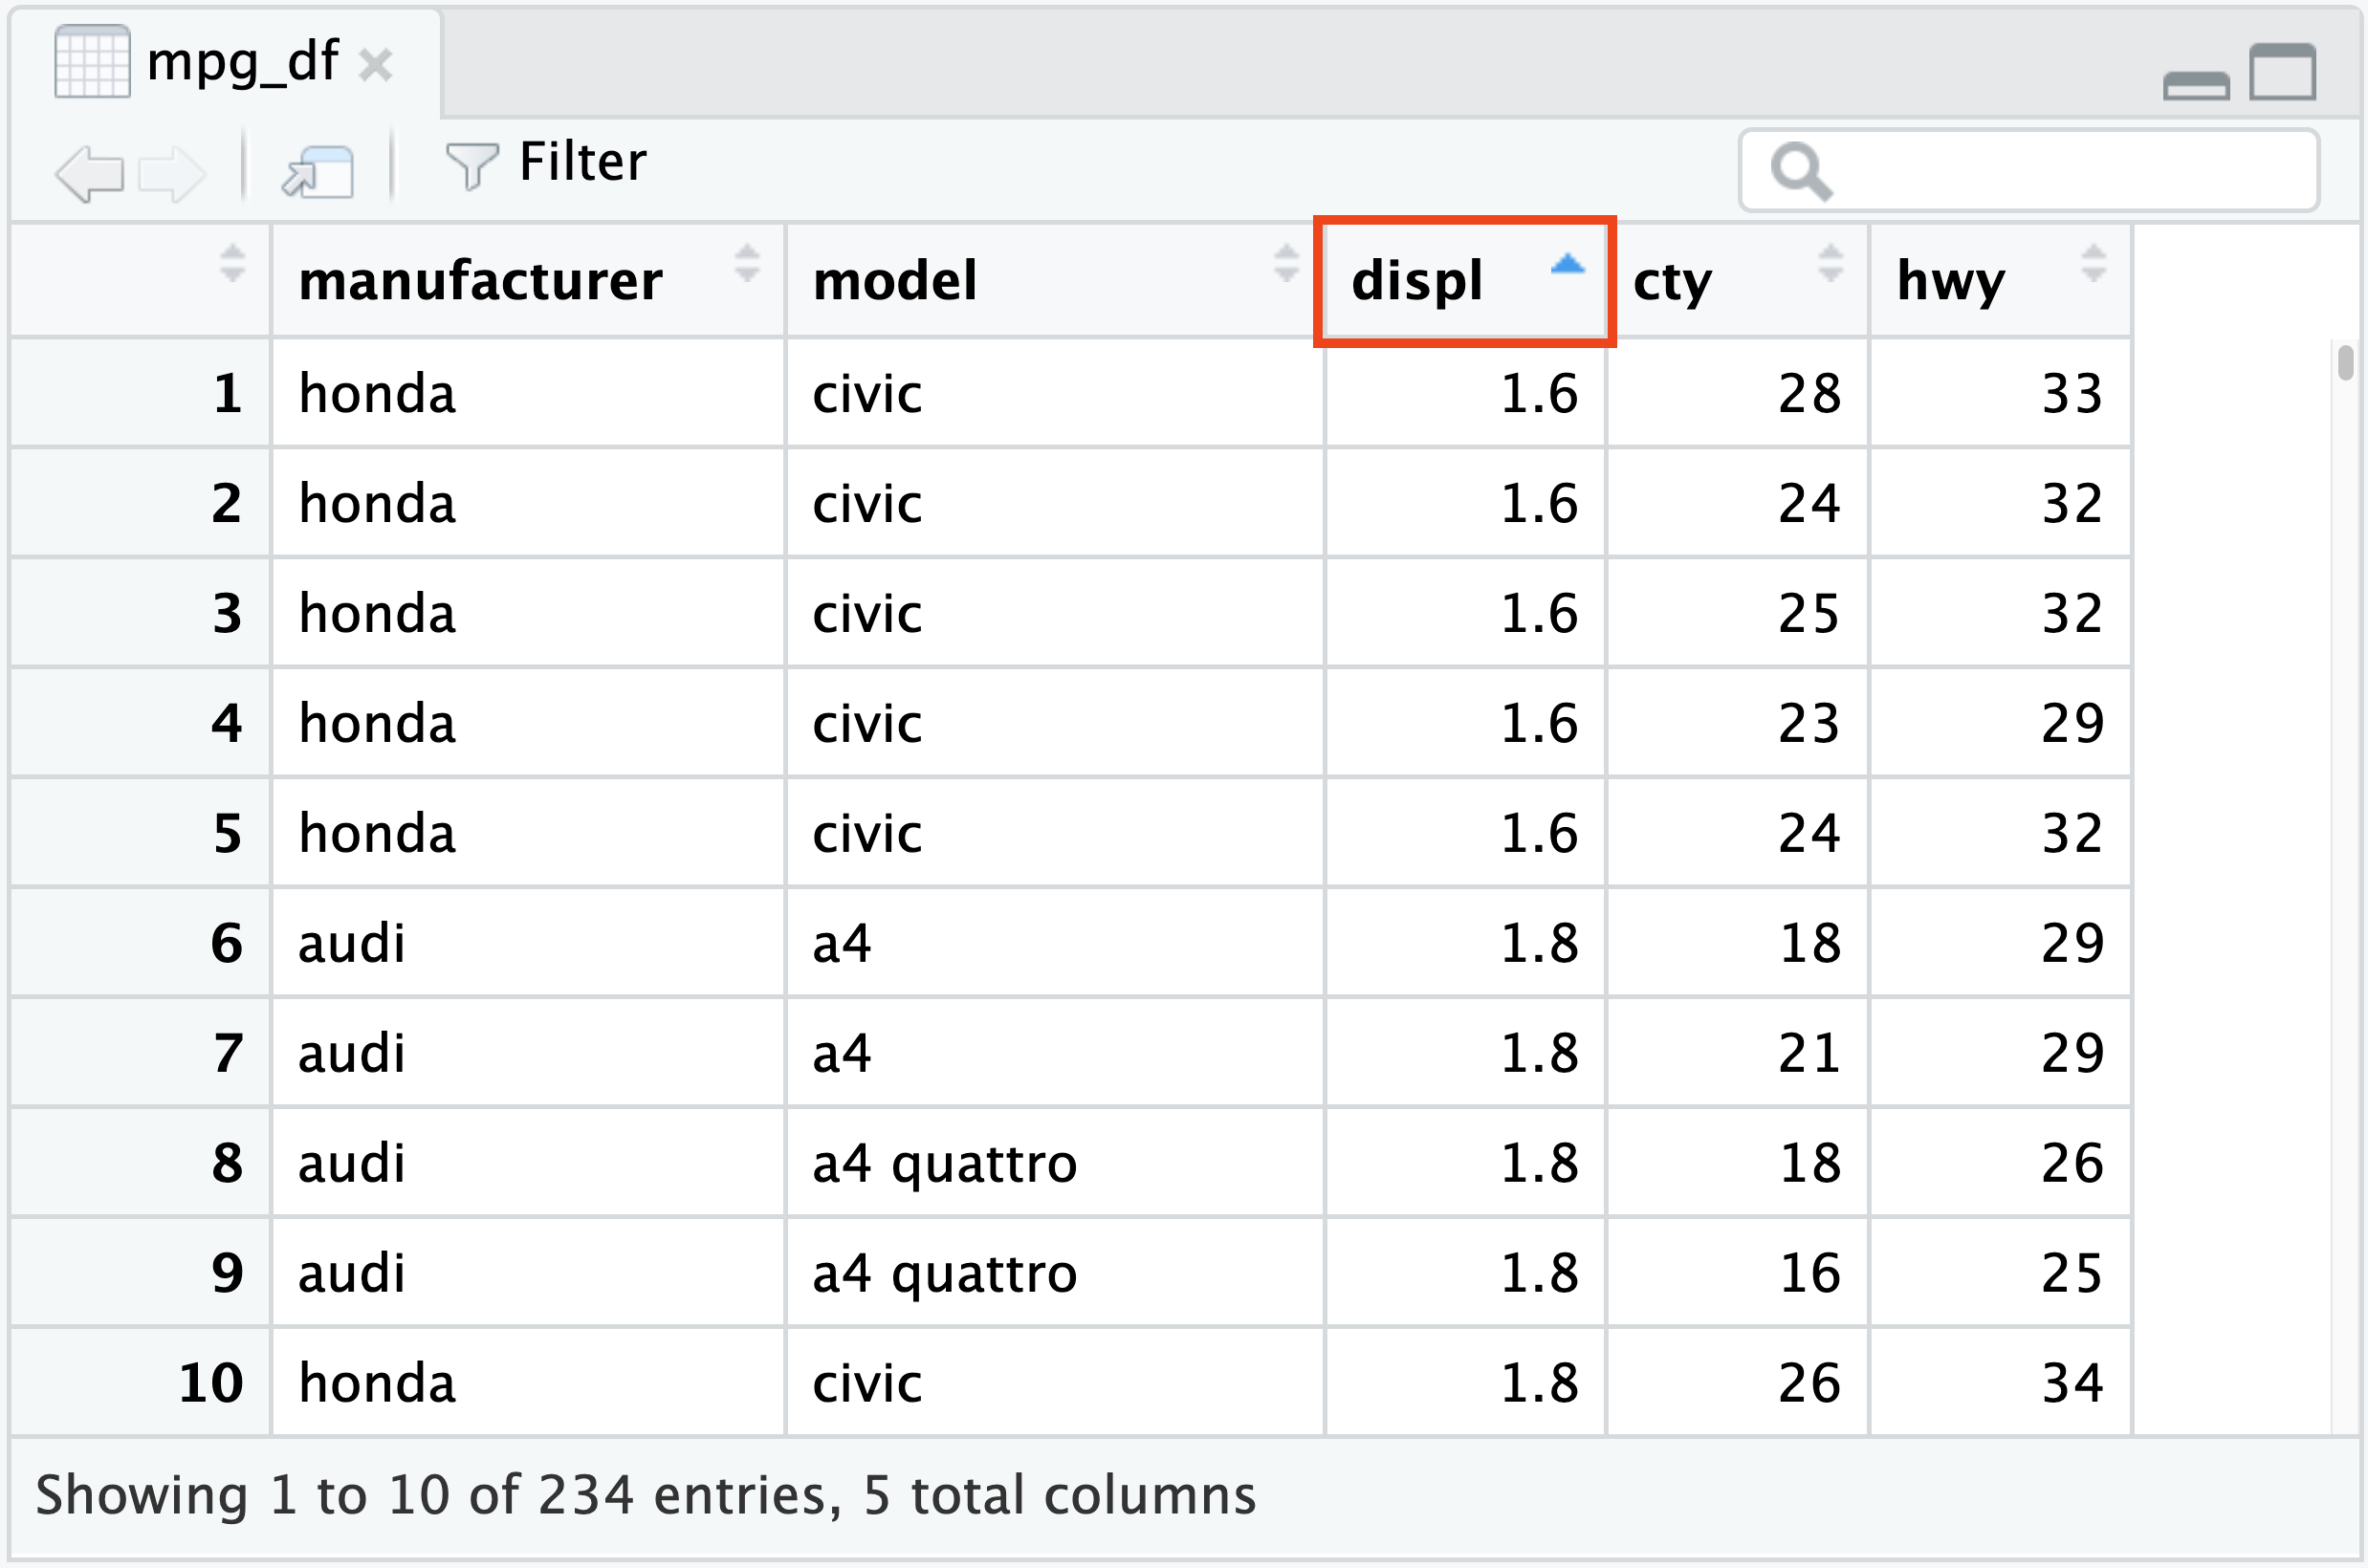 A datatable in the Data Viewer displaying 5 columns and 10 rows of the mpg_df dataset, sorted by ascending displ